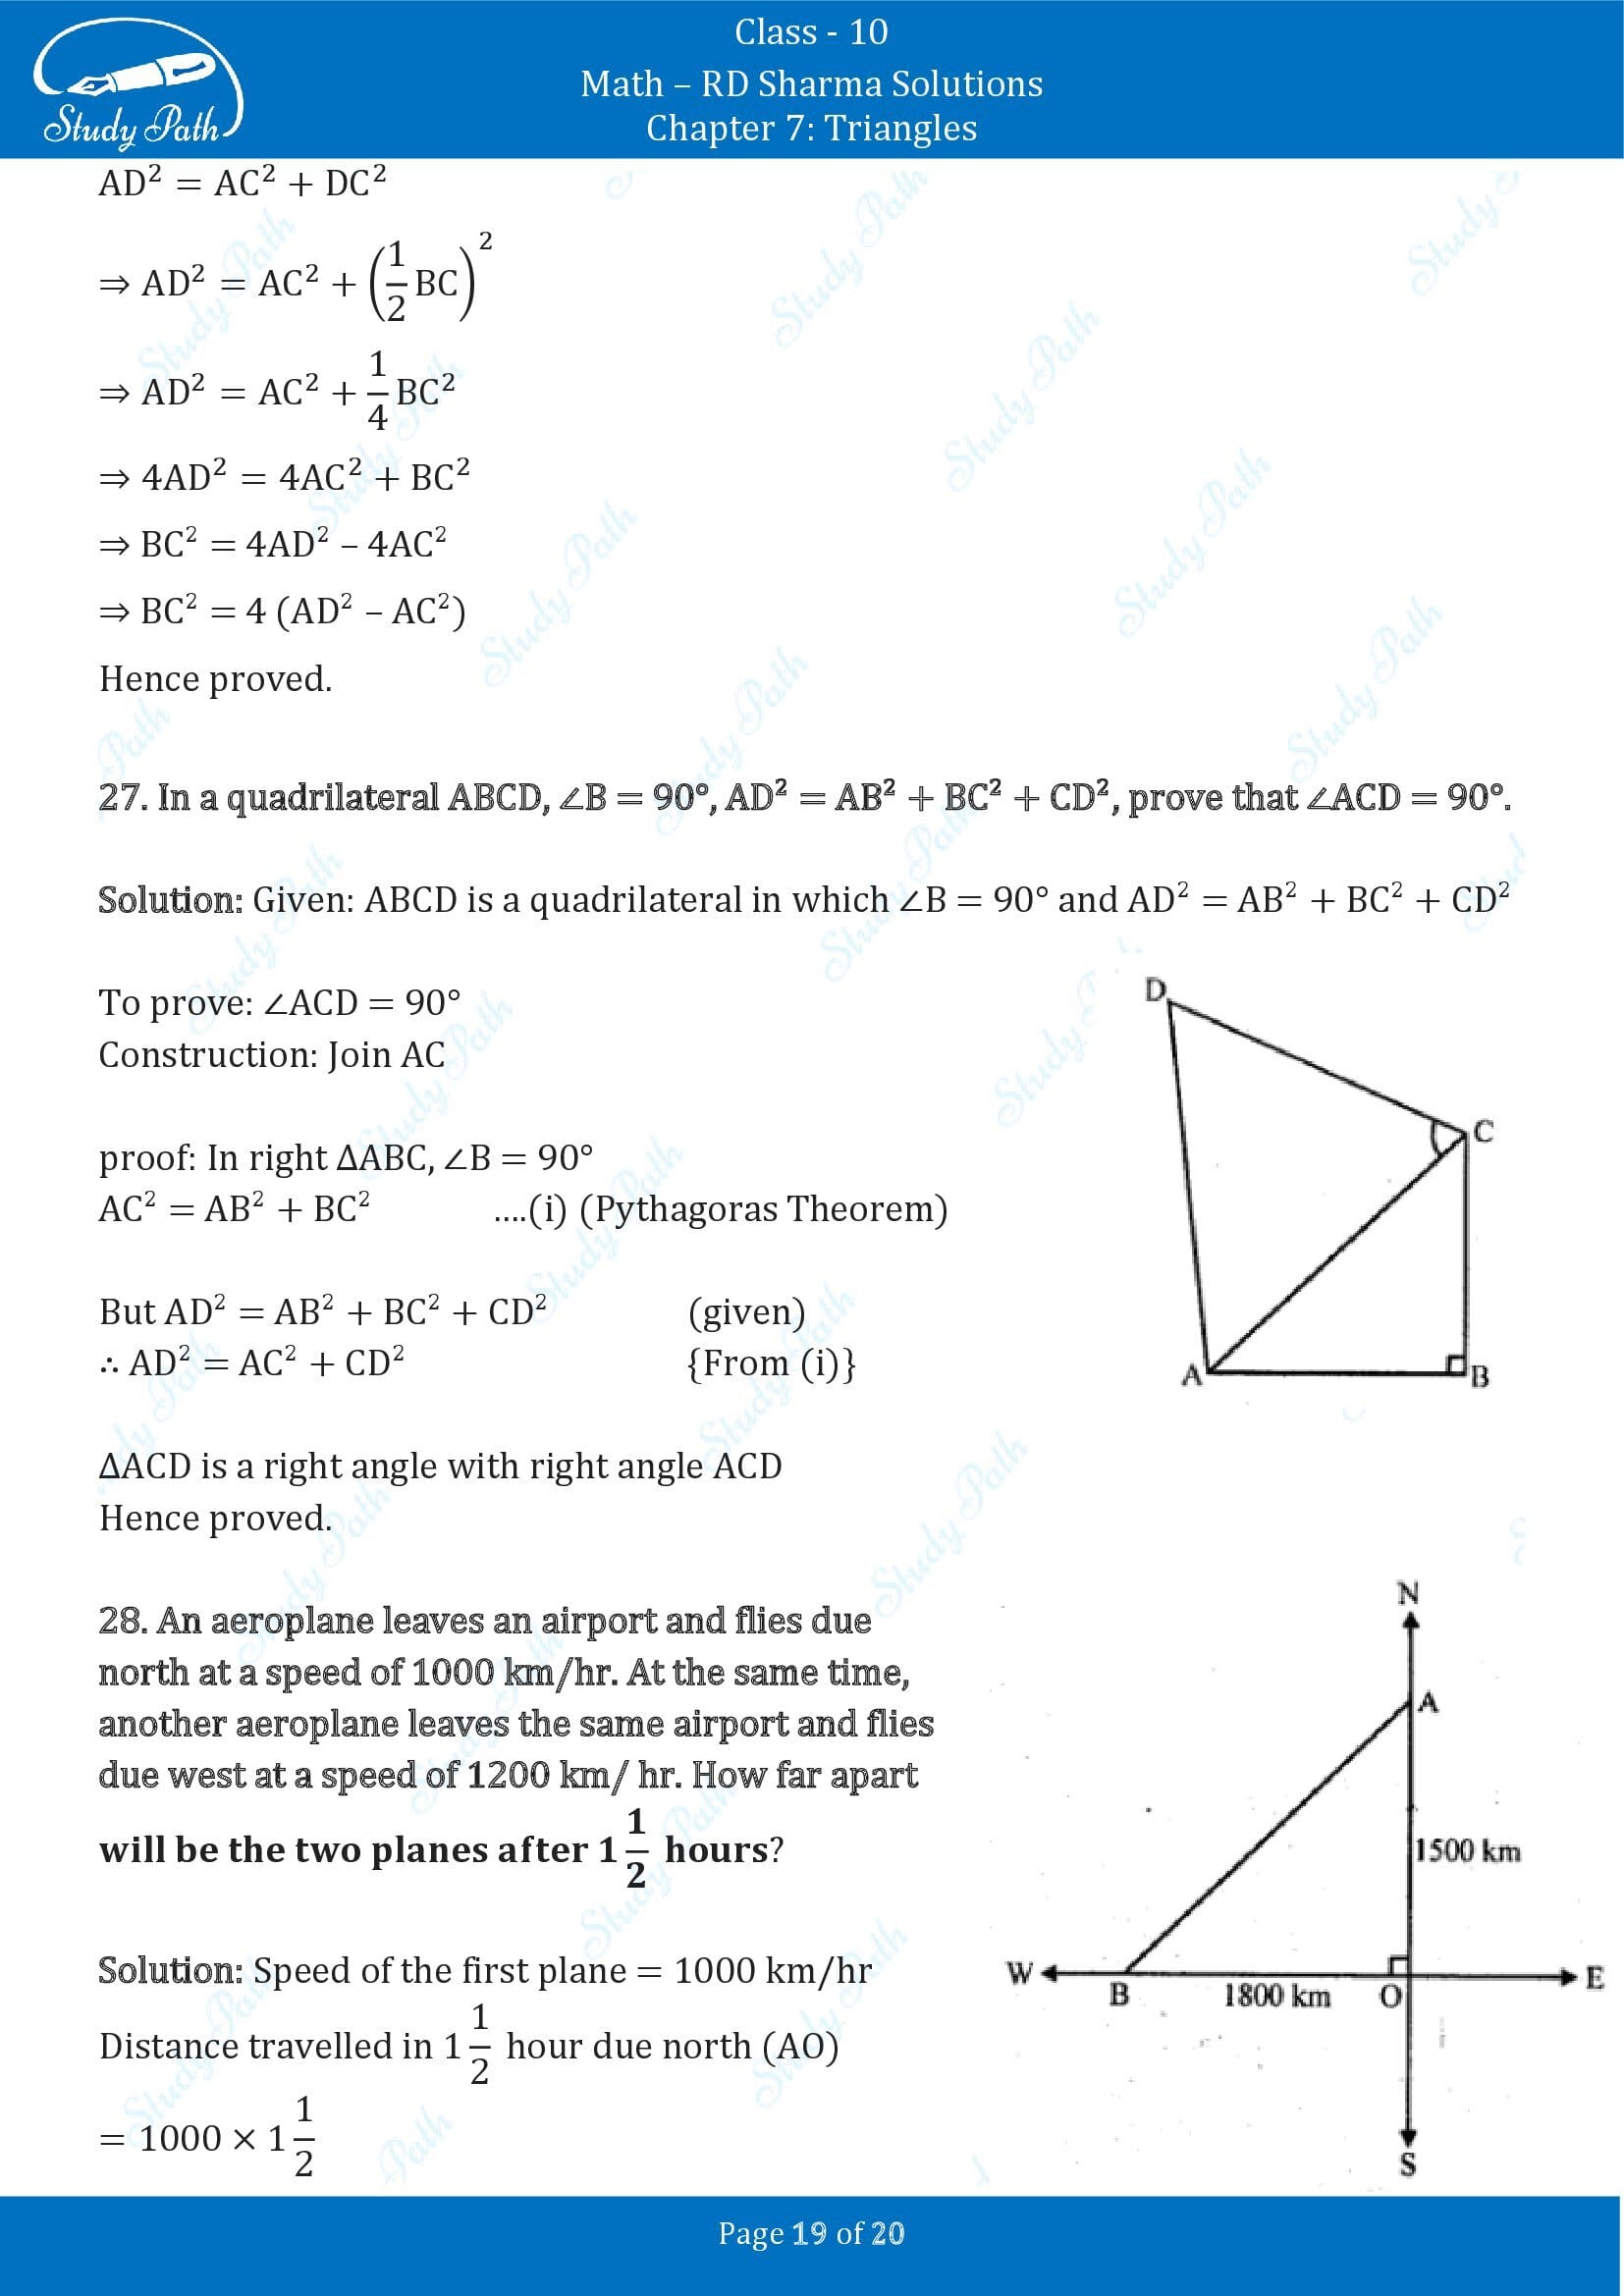 RD Sharma Solutions Class 10 Chapter 7 Triangles Exercise 7.7 00019